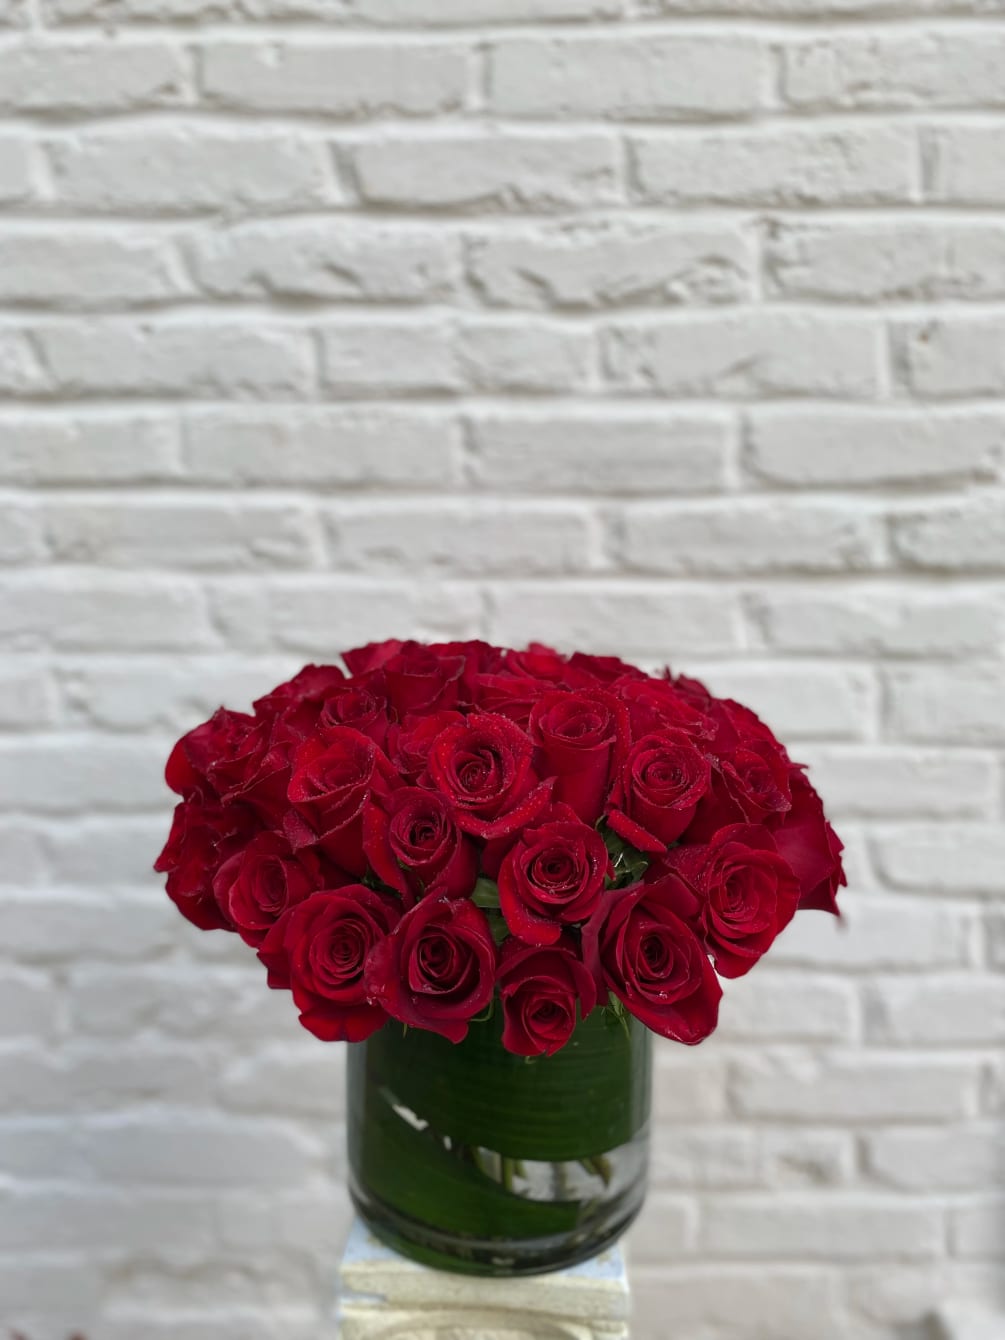 Express your love with this classic arrangement of four dozen red roses.